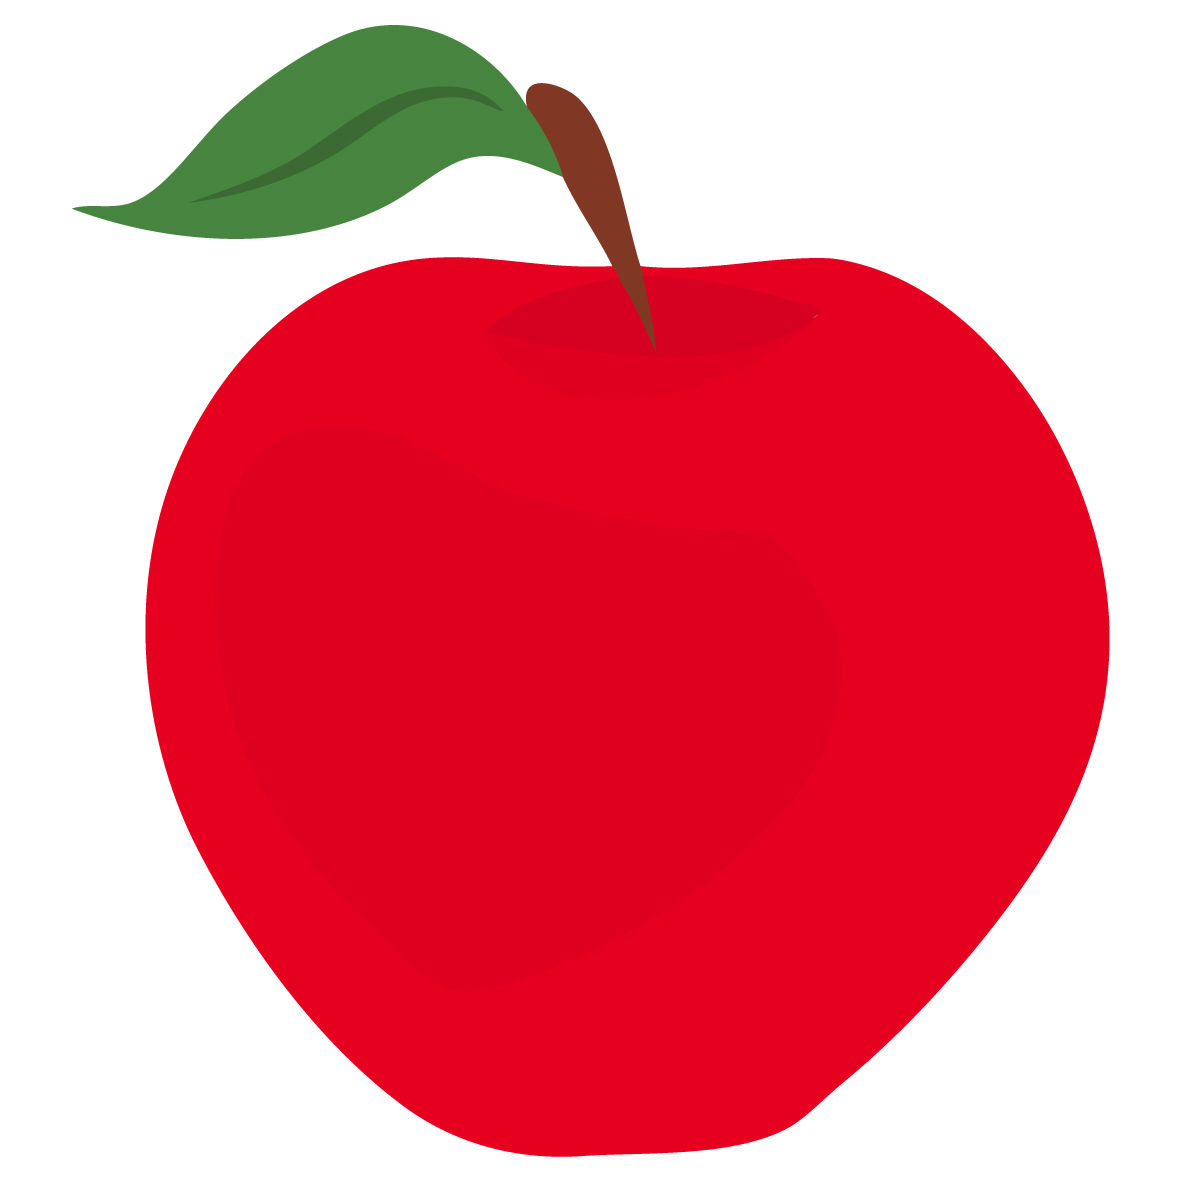 Red apple clipart no background